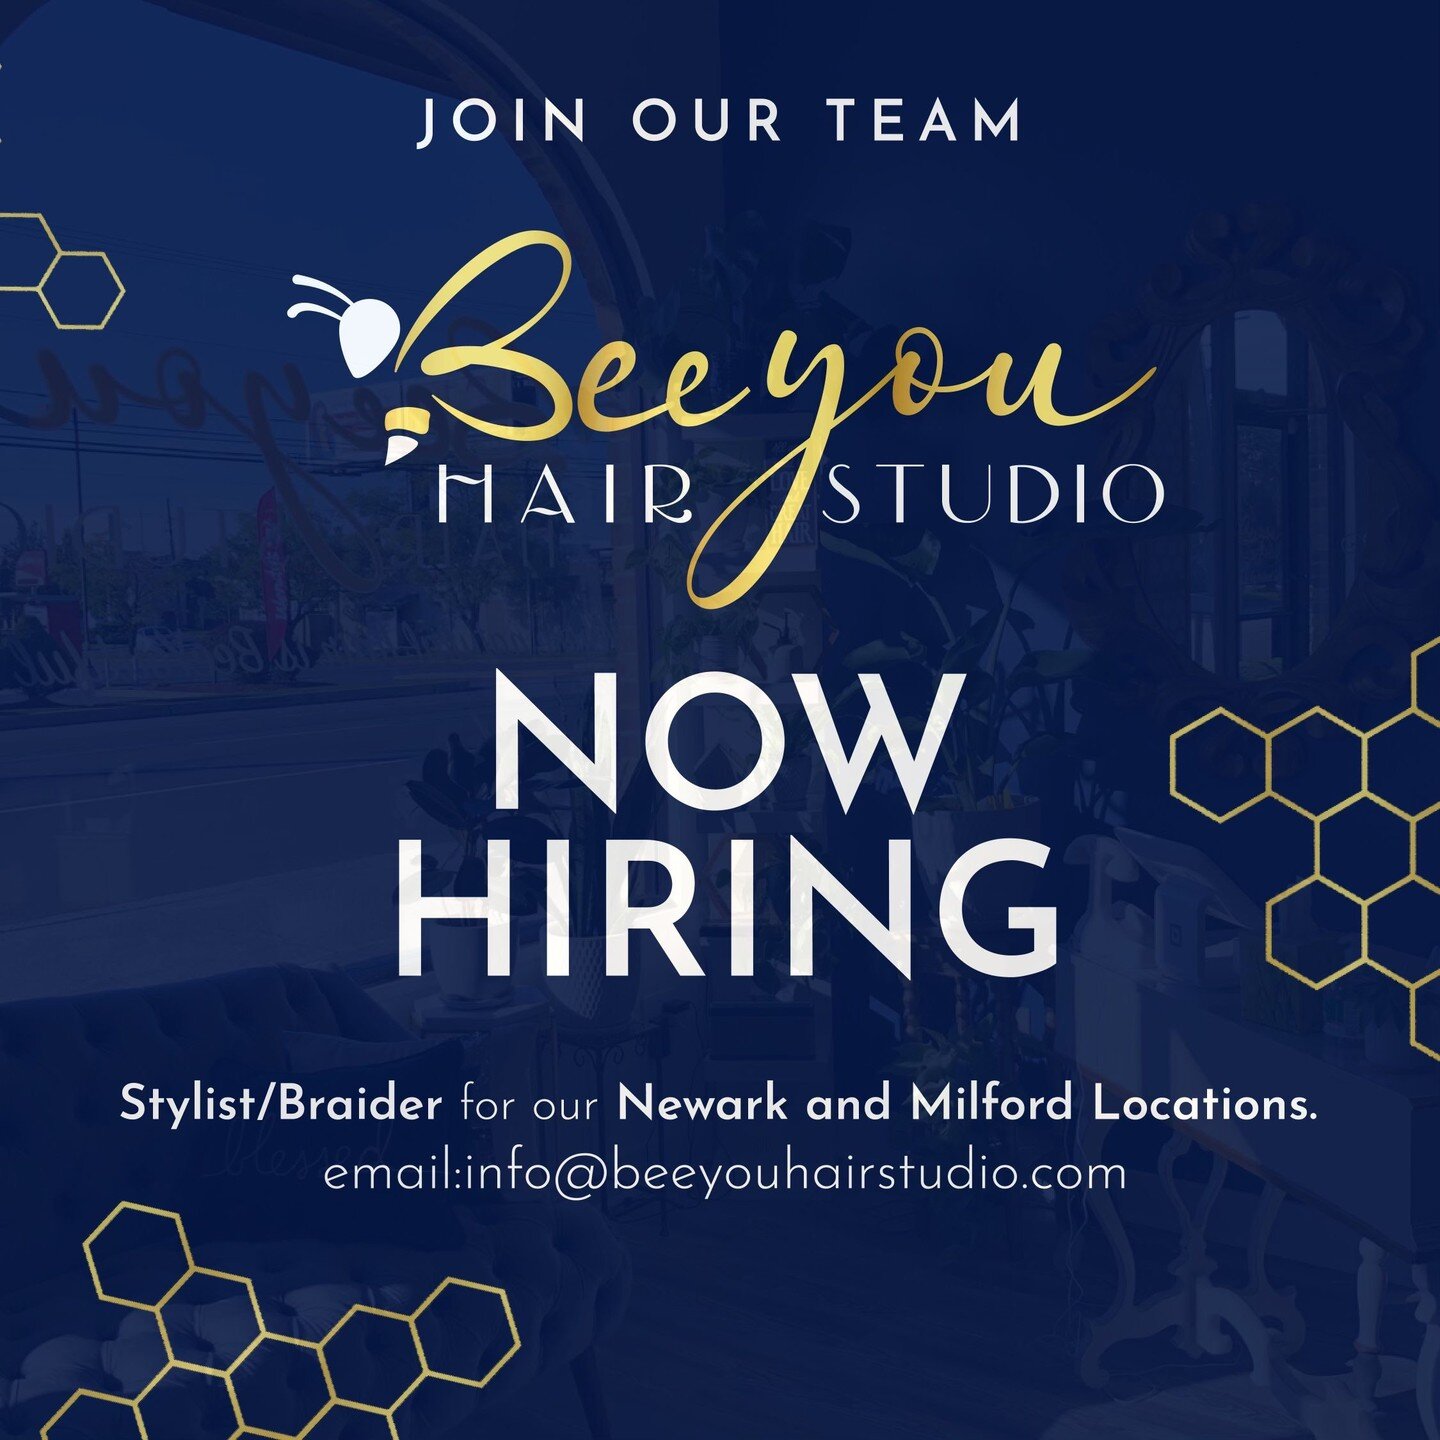 Bee You Hair Studio is a place that focuses on the WHOLE woman. It is a place where kinks, curls, waves, and coils are loved. An exclusive one-on-one experience is provided with natural haircare support offered beyond the chair. This is a kid friendl